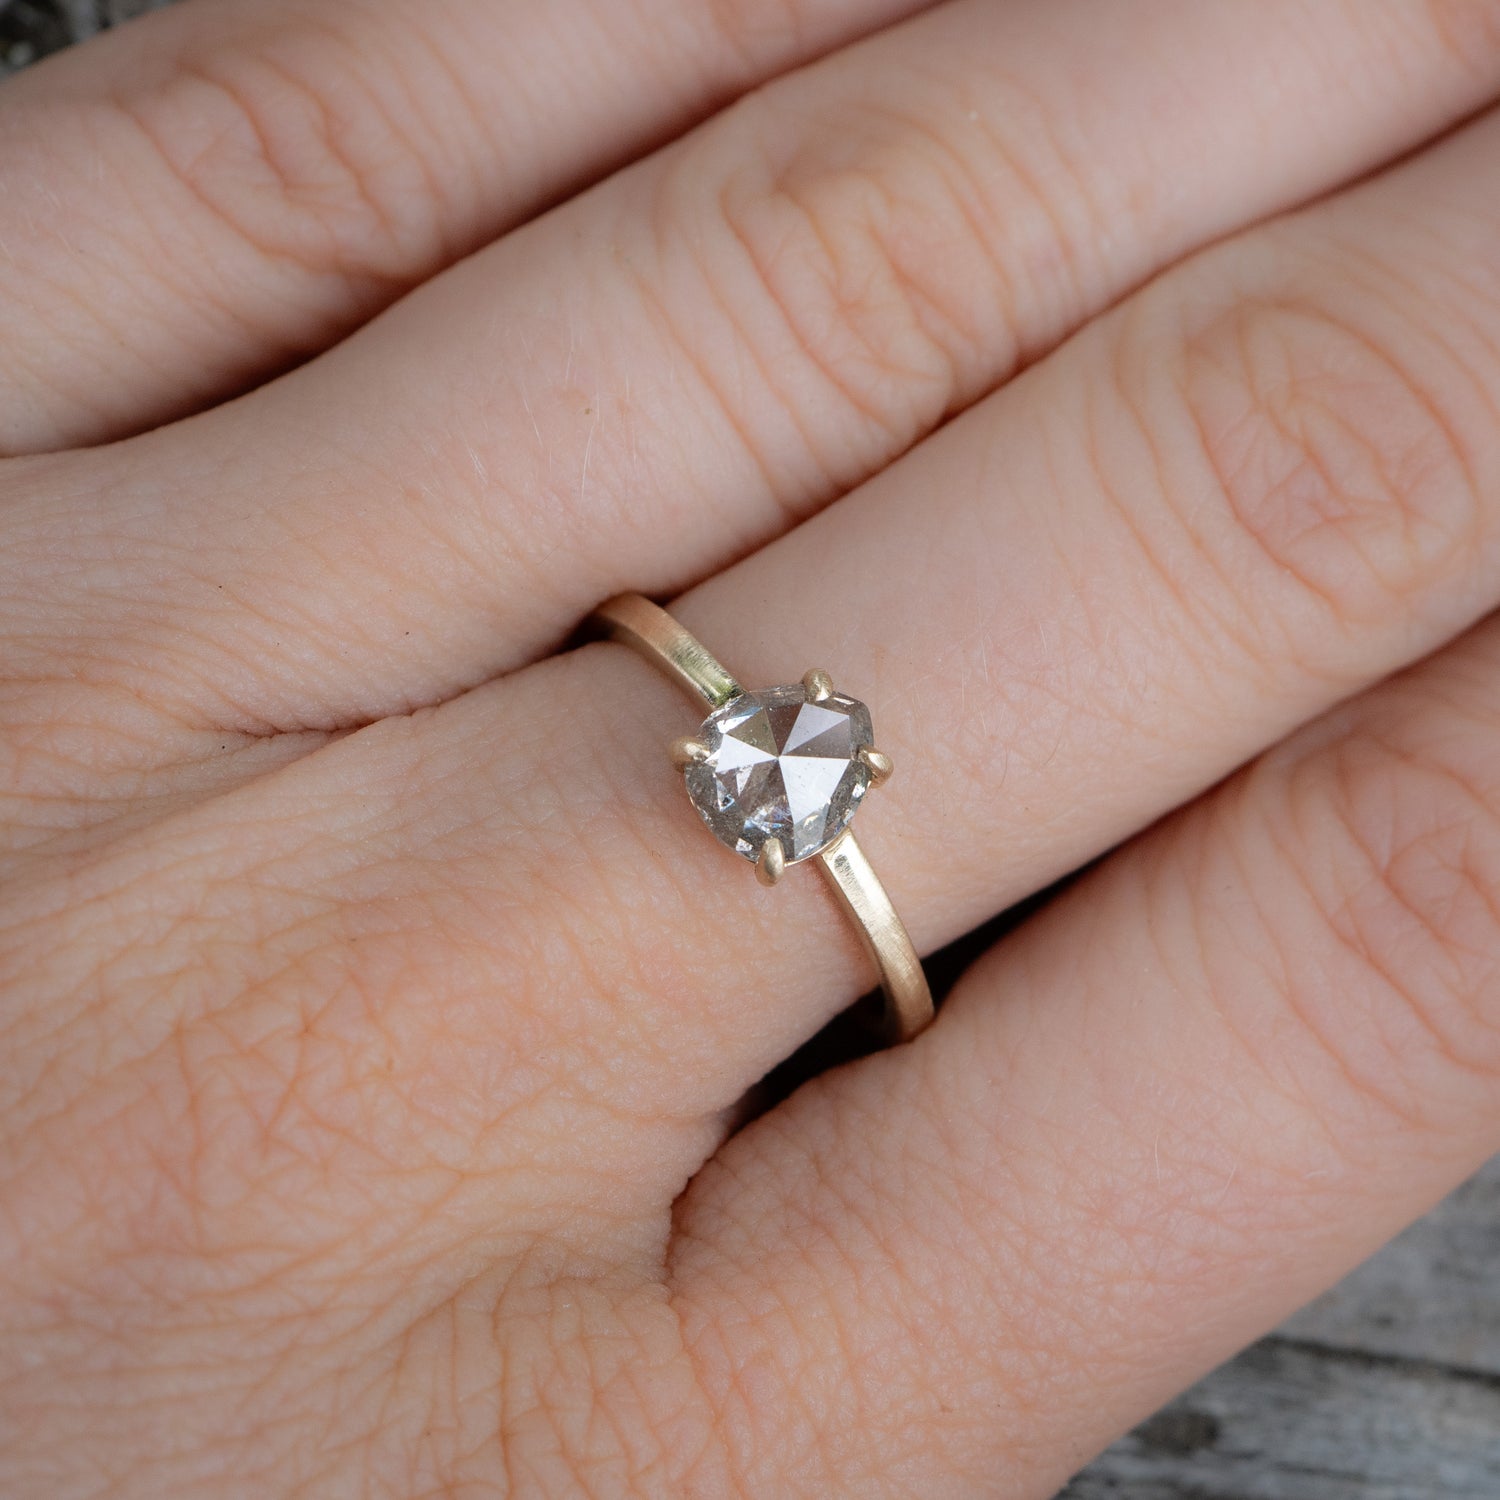 Ready to to ship: Salt and Pepper Pear Diamond Ring - Salt and Pepper Diamond Ring- mossNstone